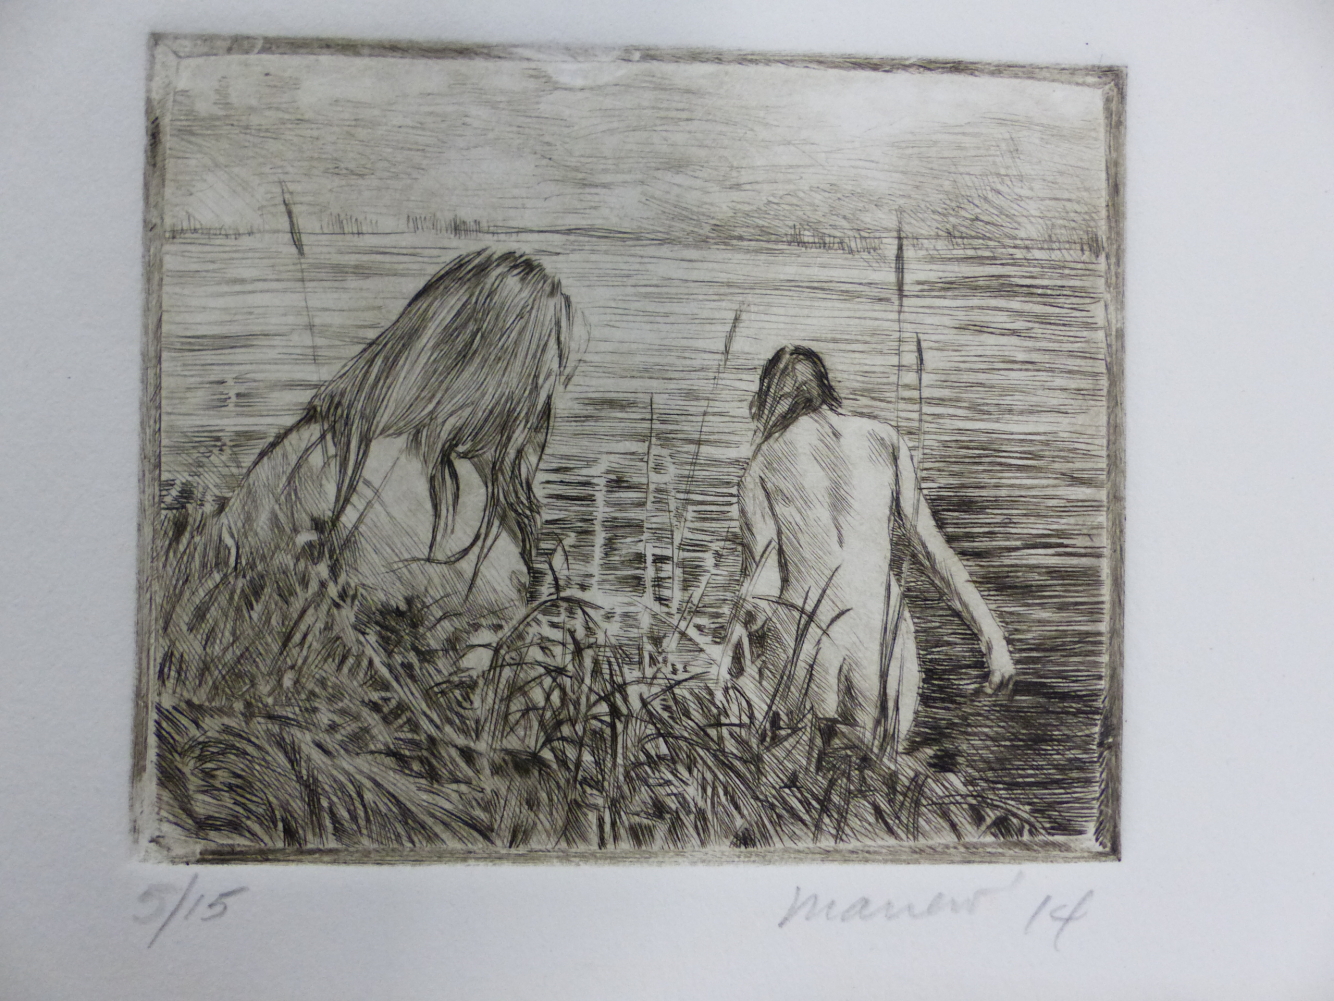 SIX 20th/21st C. ETCHINGS OF FIGURAL SUBJECTS BY DIFFERENT HANDS, MOST PENCIL SIGNED INCLUDES - Image 4 of 6